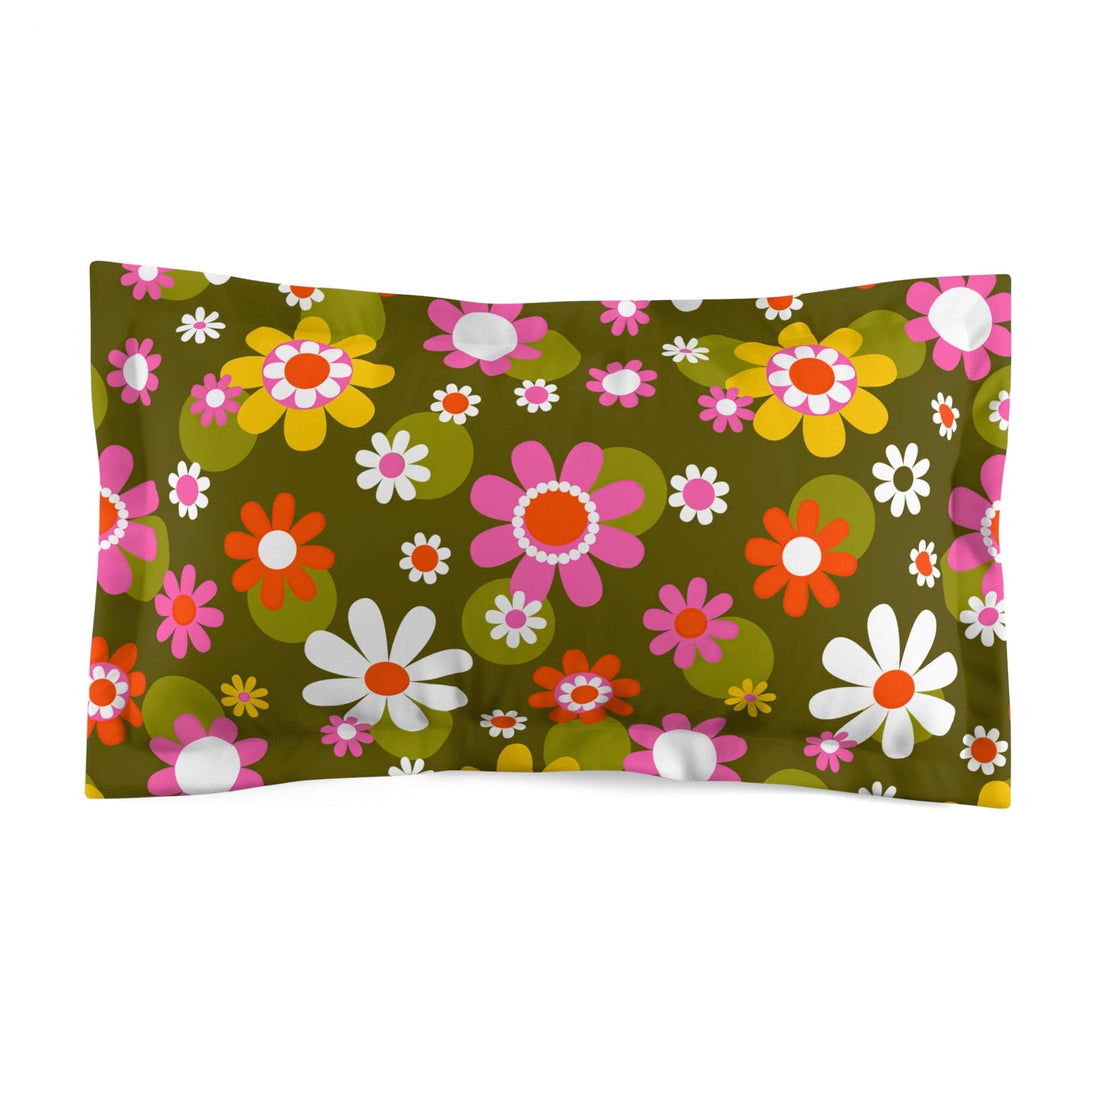 Printify Groovy Hippie Daisy Flower Power Pillow Sham, Retro Mid Mod Green, Pink Floral Bedroom Pillow Home Decor King 29695007644042997454